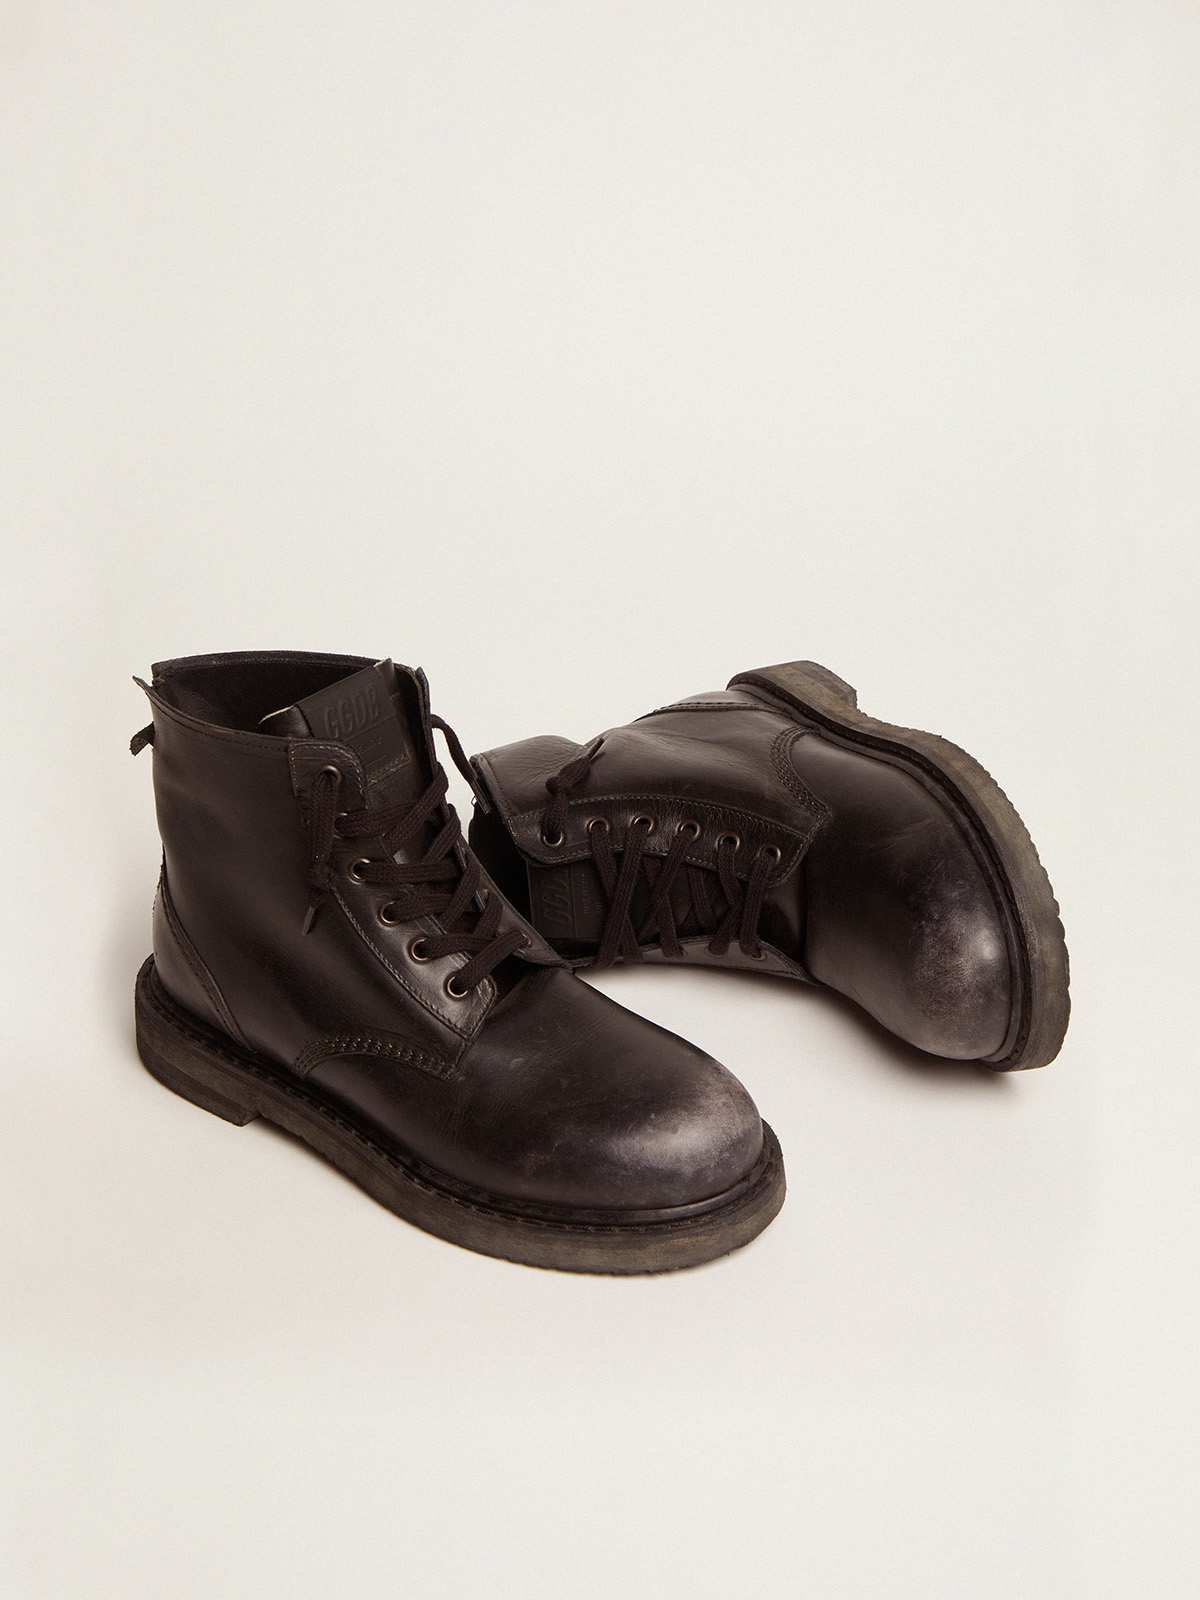 Women's boots black leather Goose